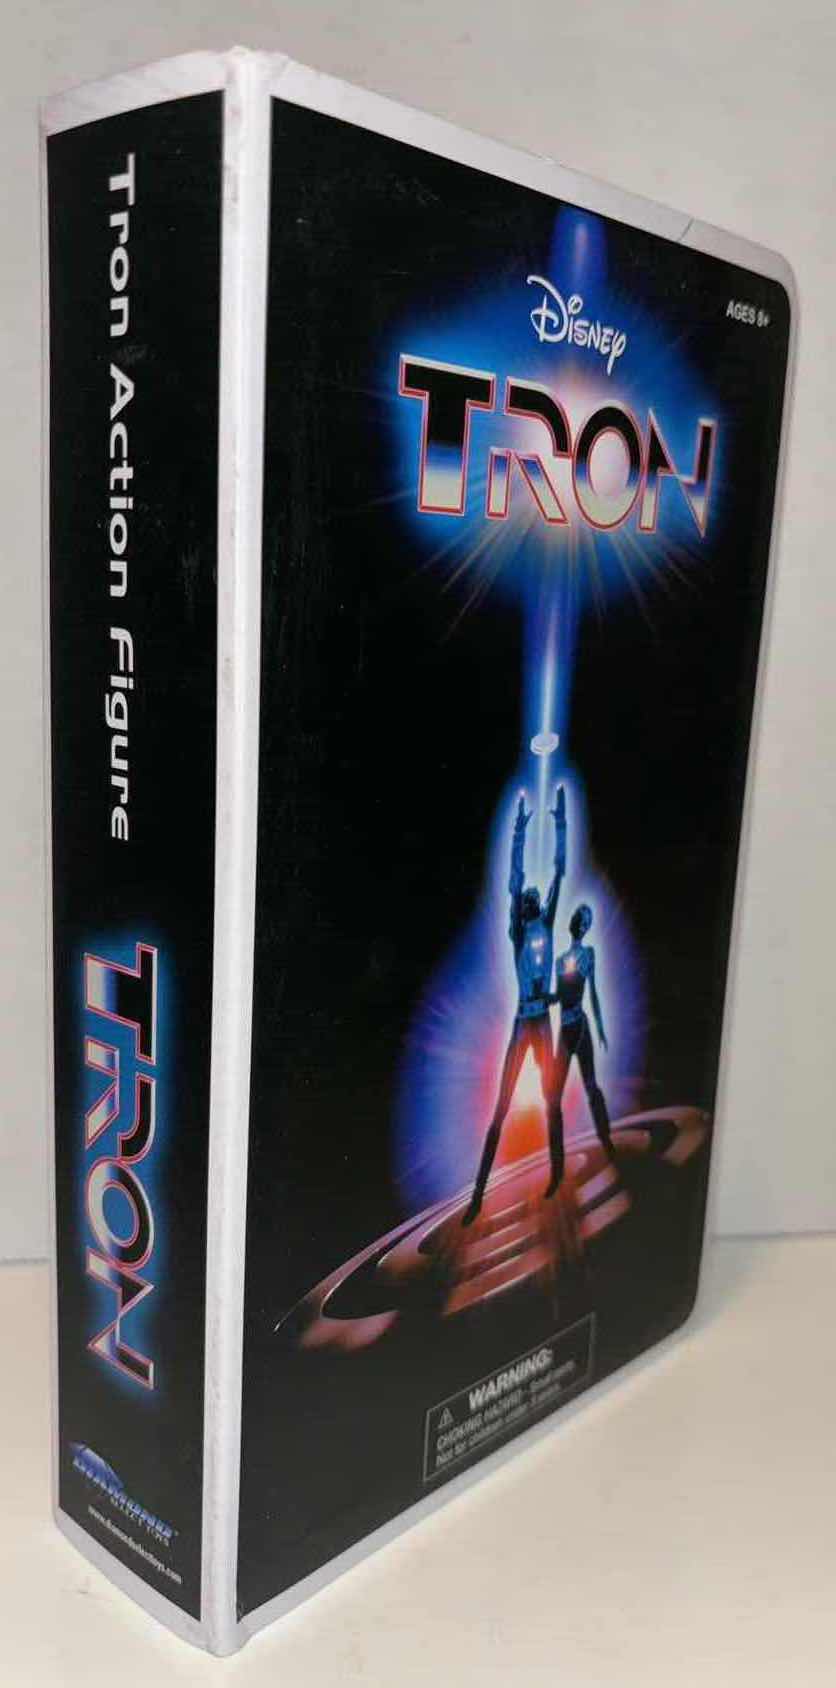 Photo 3 of NEW DIAMOND SELECT TOYS FACTORY SEALED DISNEY TRON ACTION FIGURE, LIMITED EDITION 1 OF 3,000